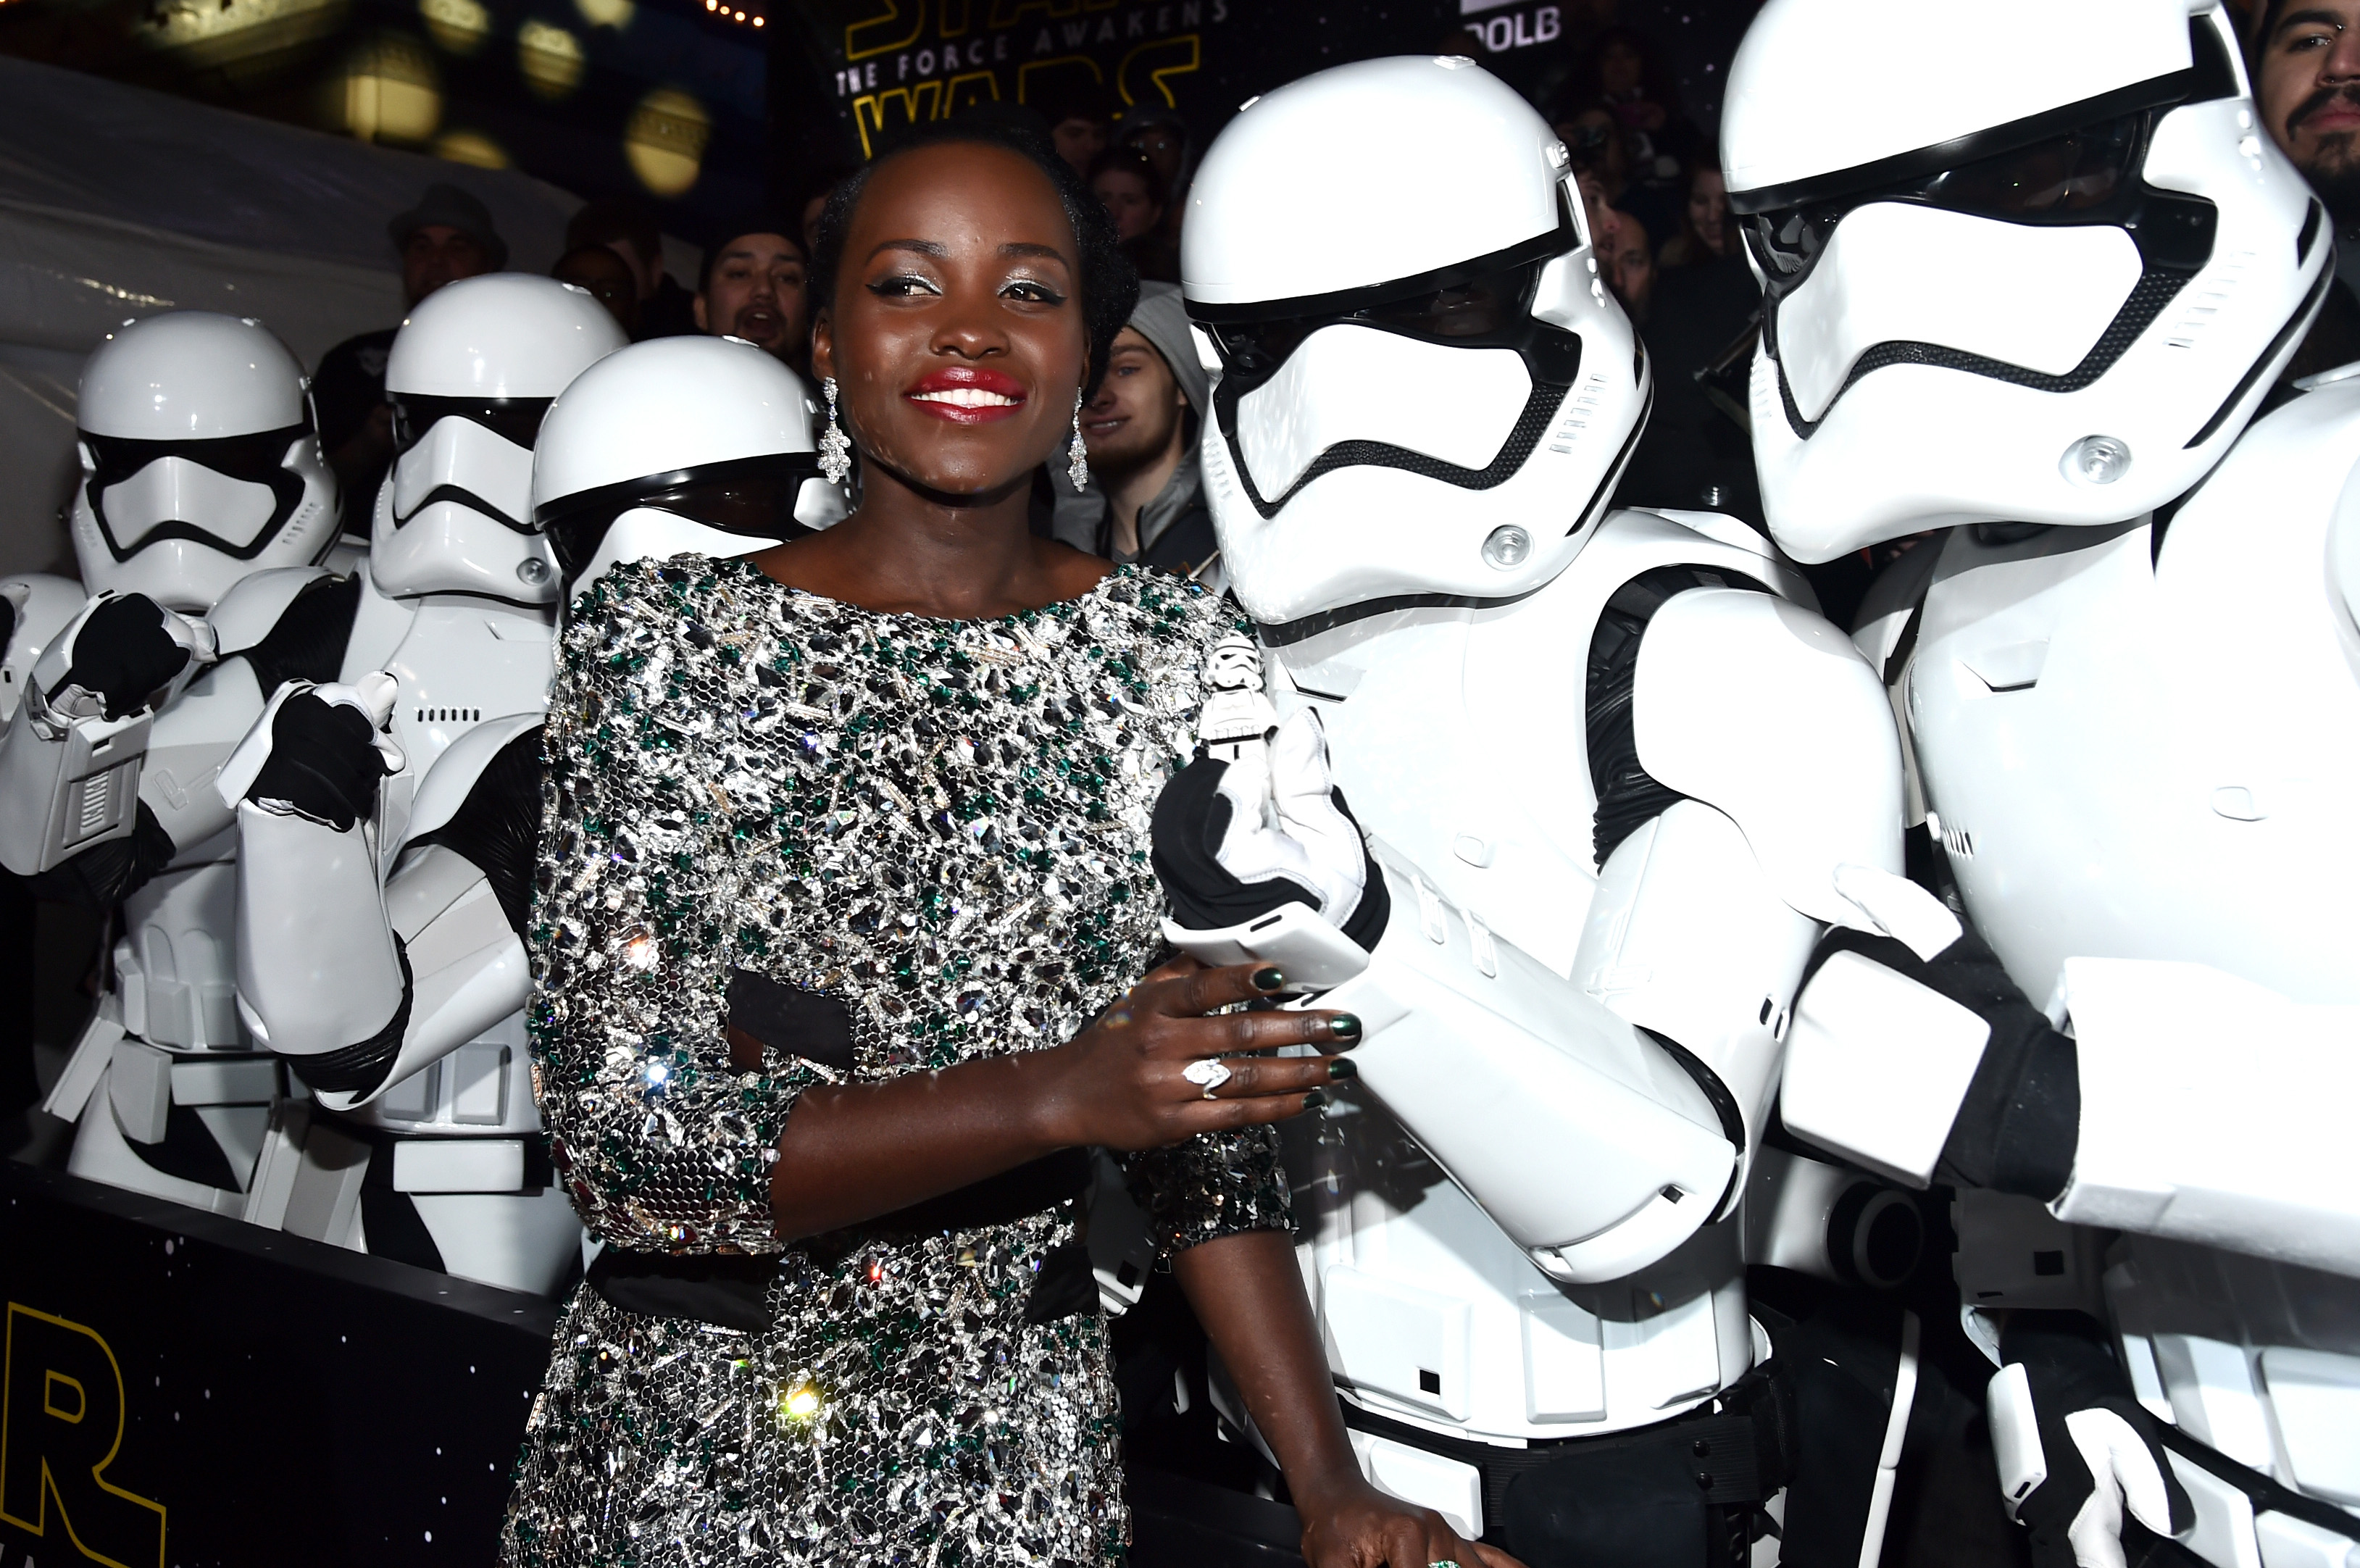 Premiere Of 'Star Wars: The Force Awakens' - Red Carpet